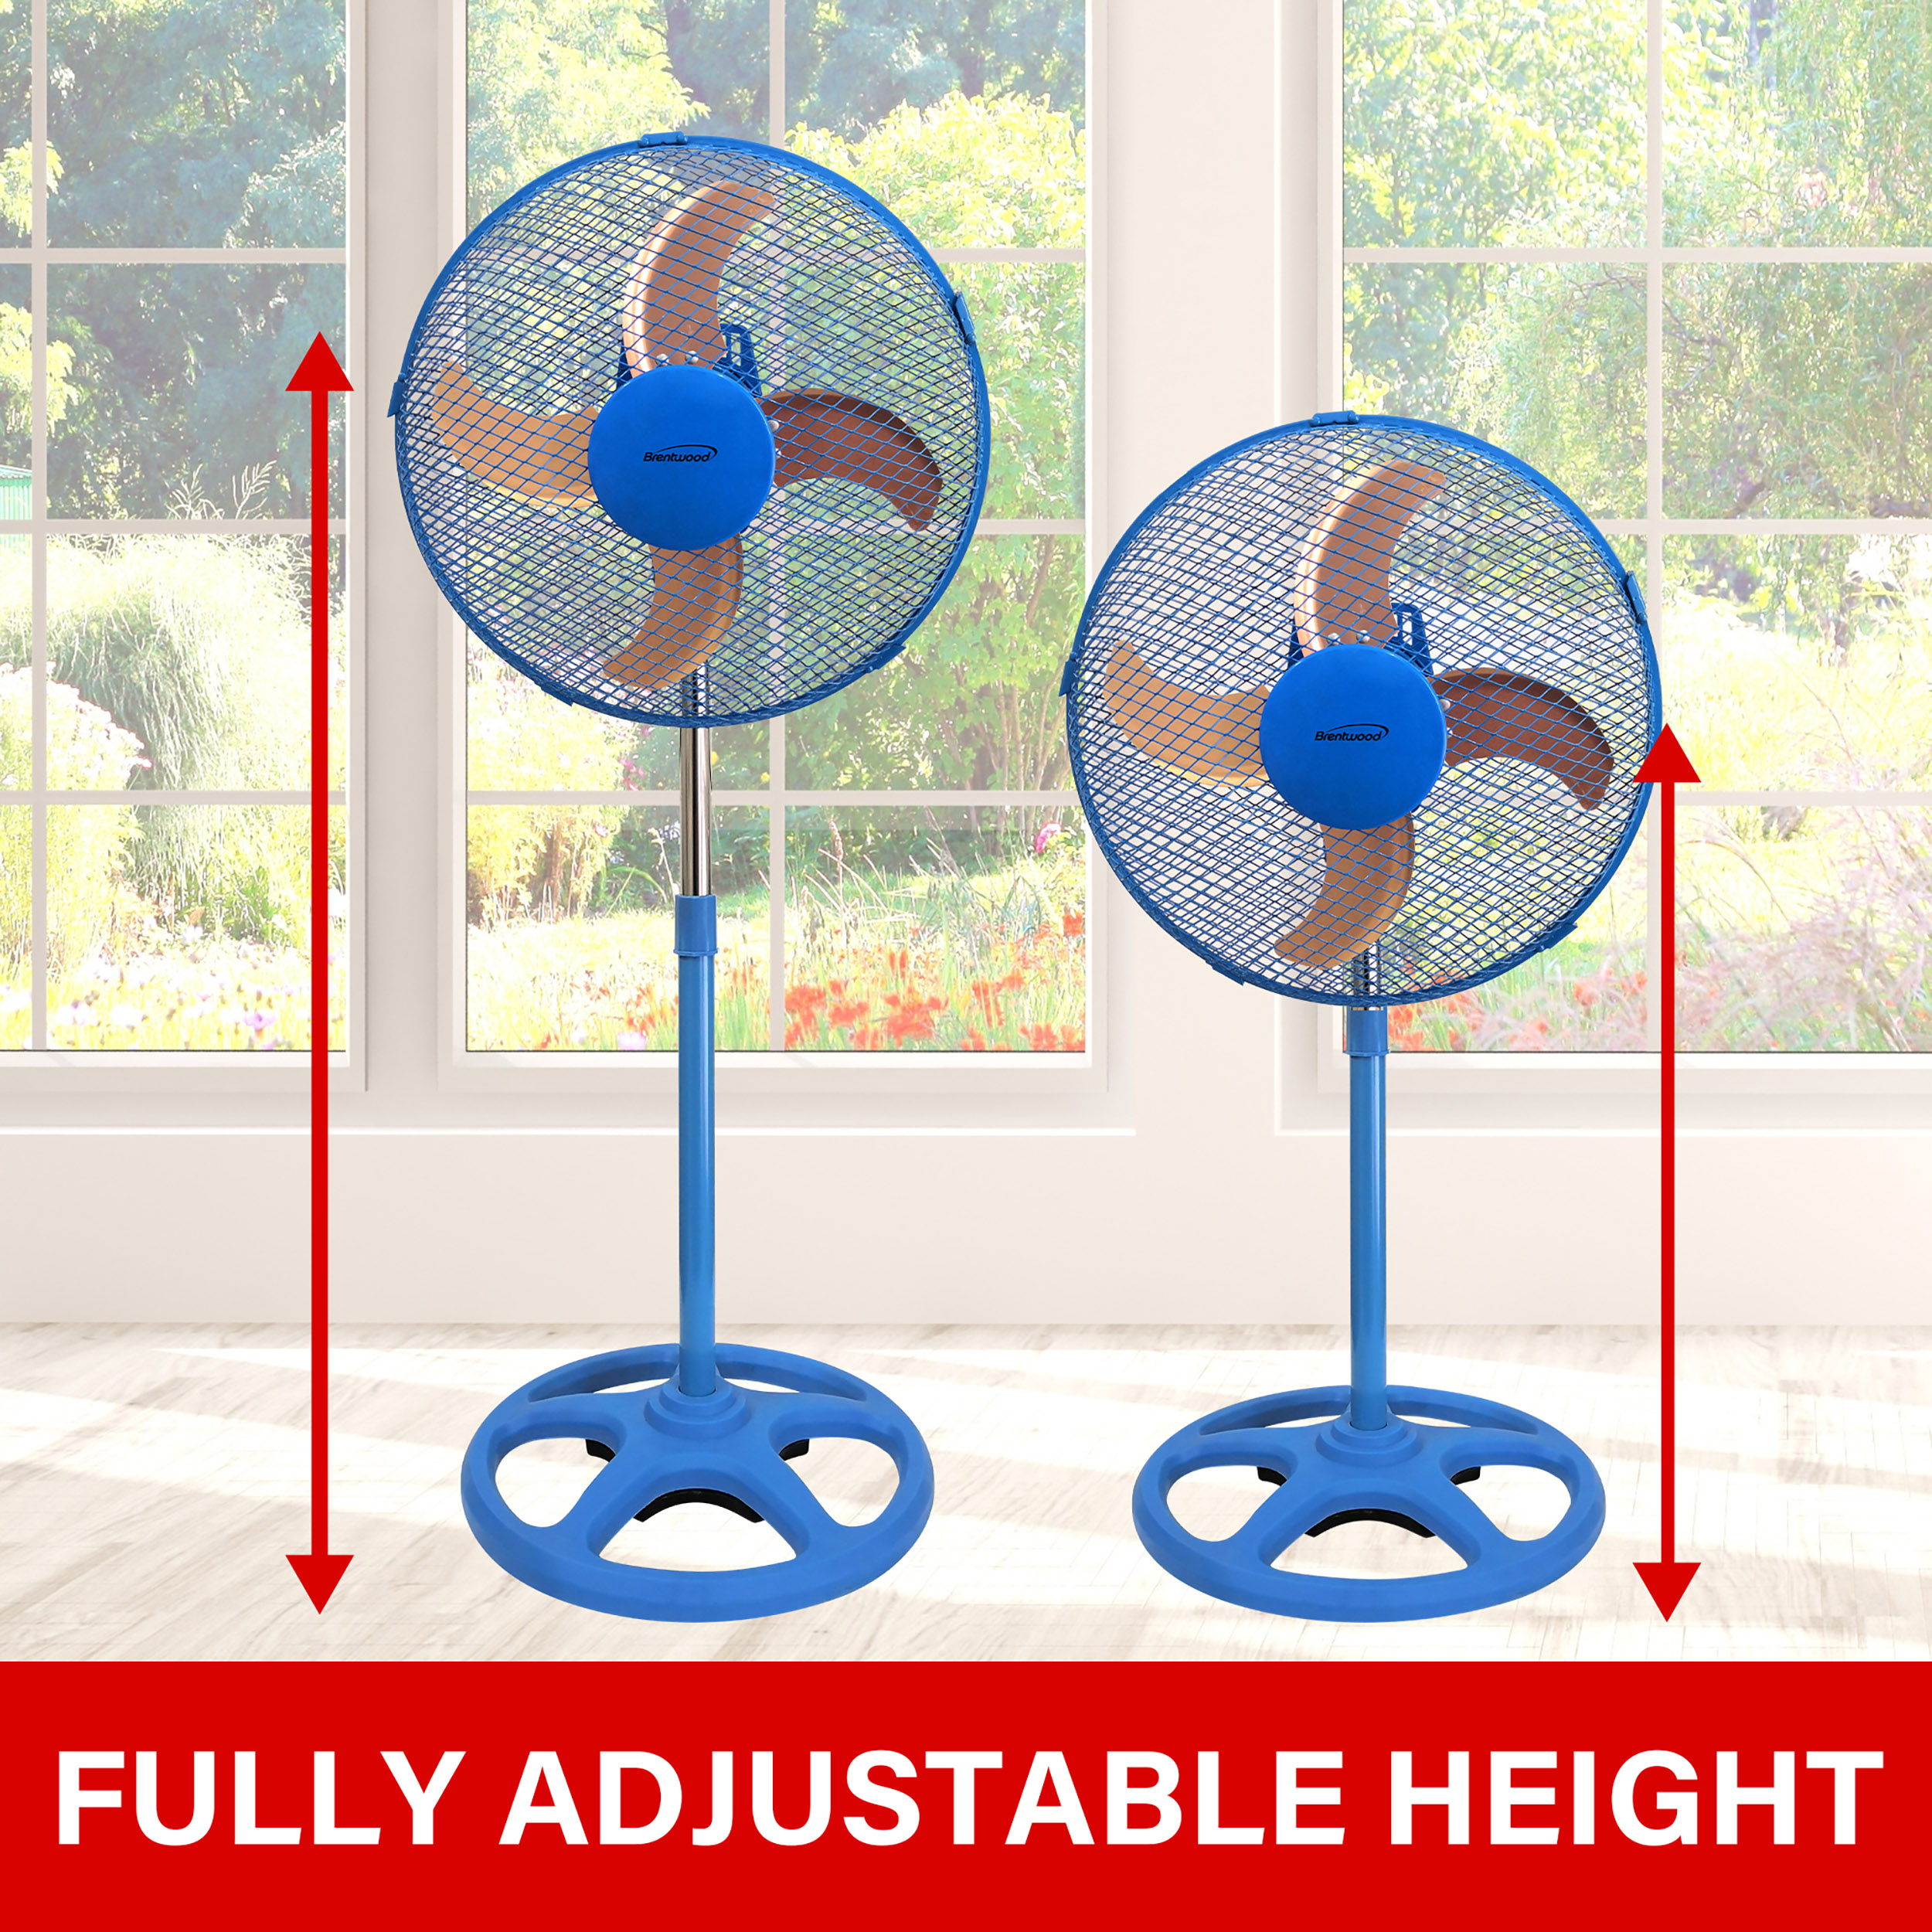 Brentwood 3 Speed 12in Oscillating Stand Fan in Blue